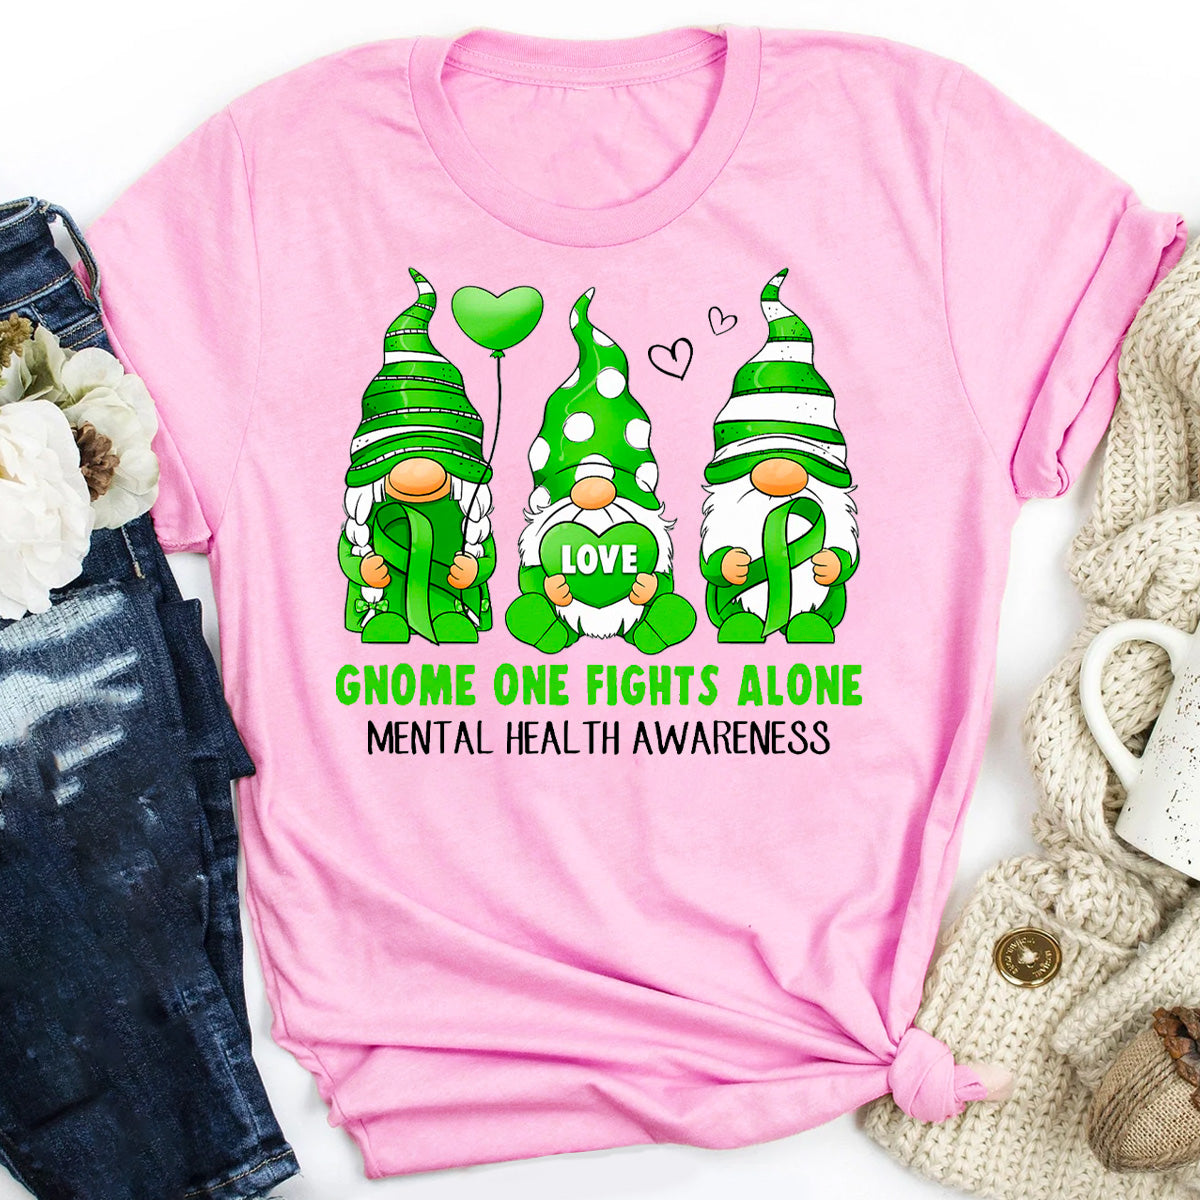 Gnome One Fights Alone Mental Health Awareness T-Shirt